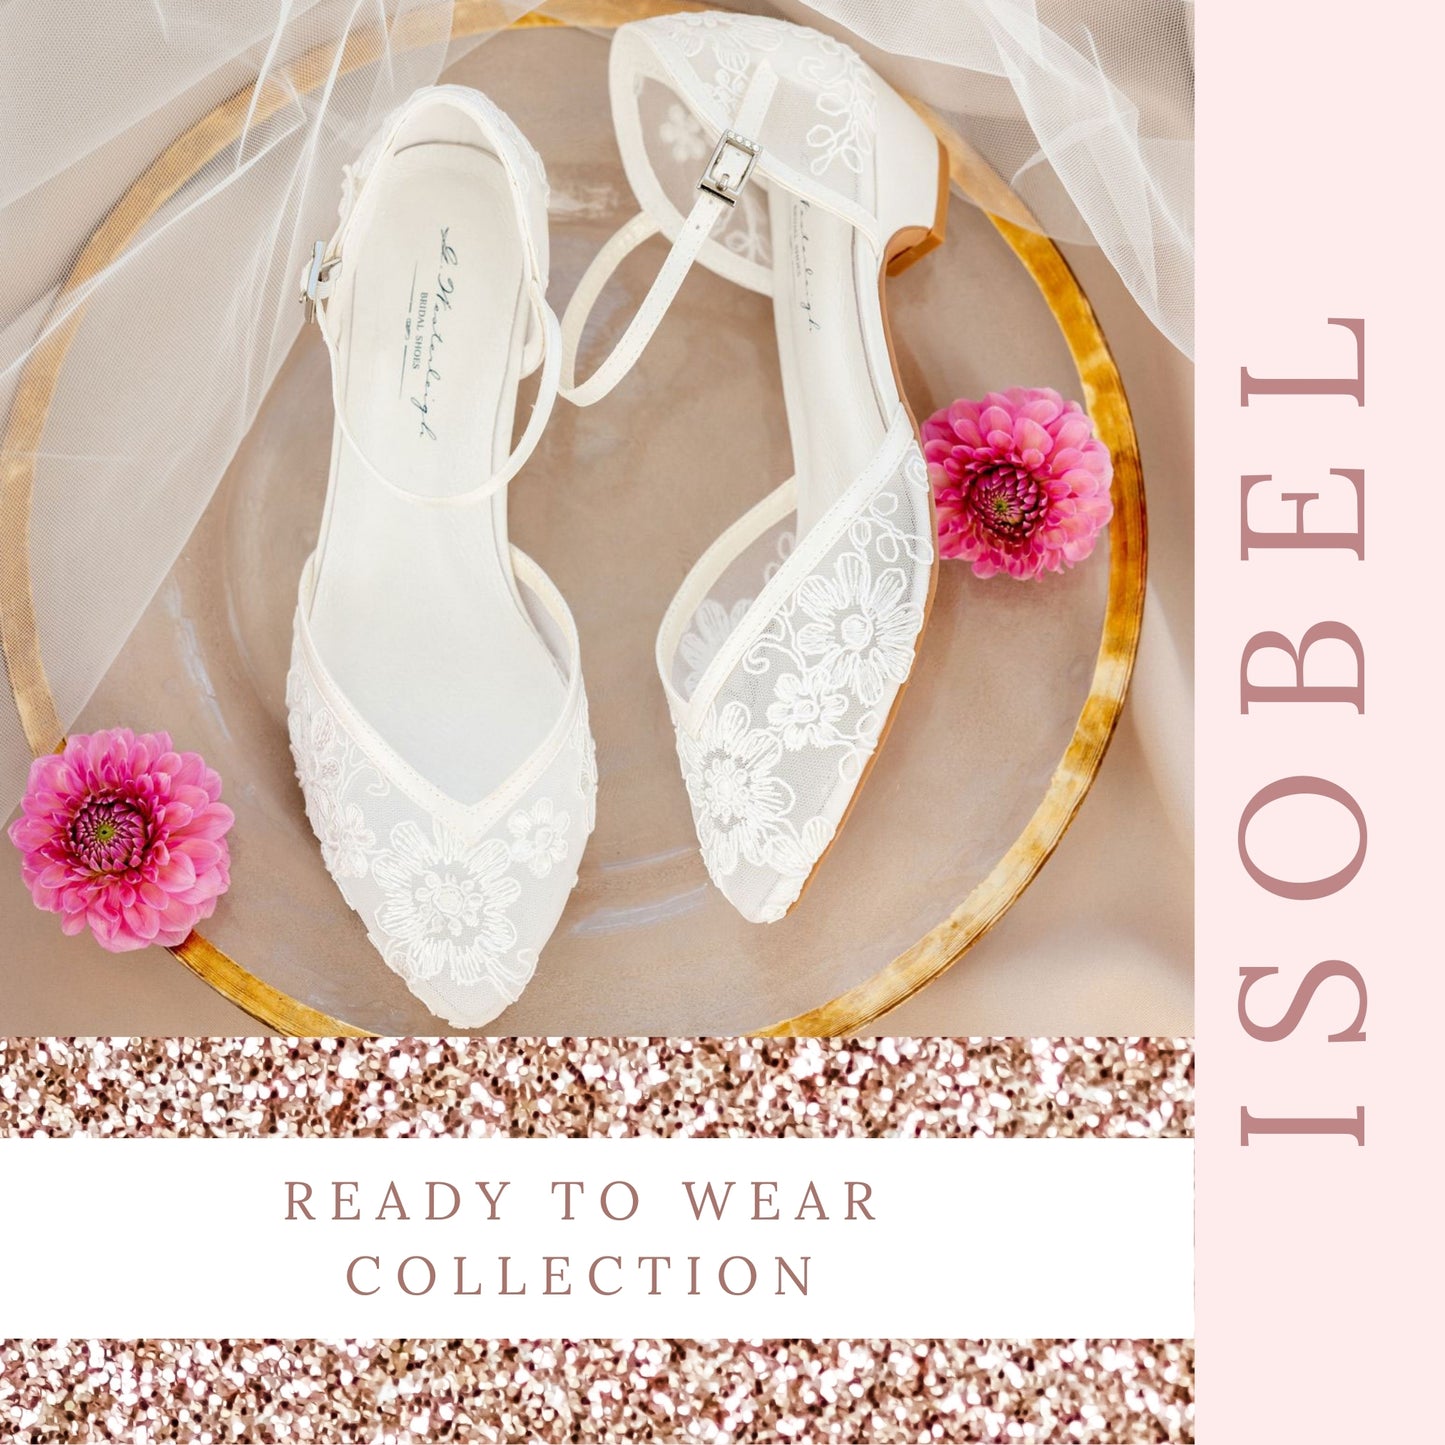 shoes-to-wear-with-lace-wedding-dress